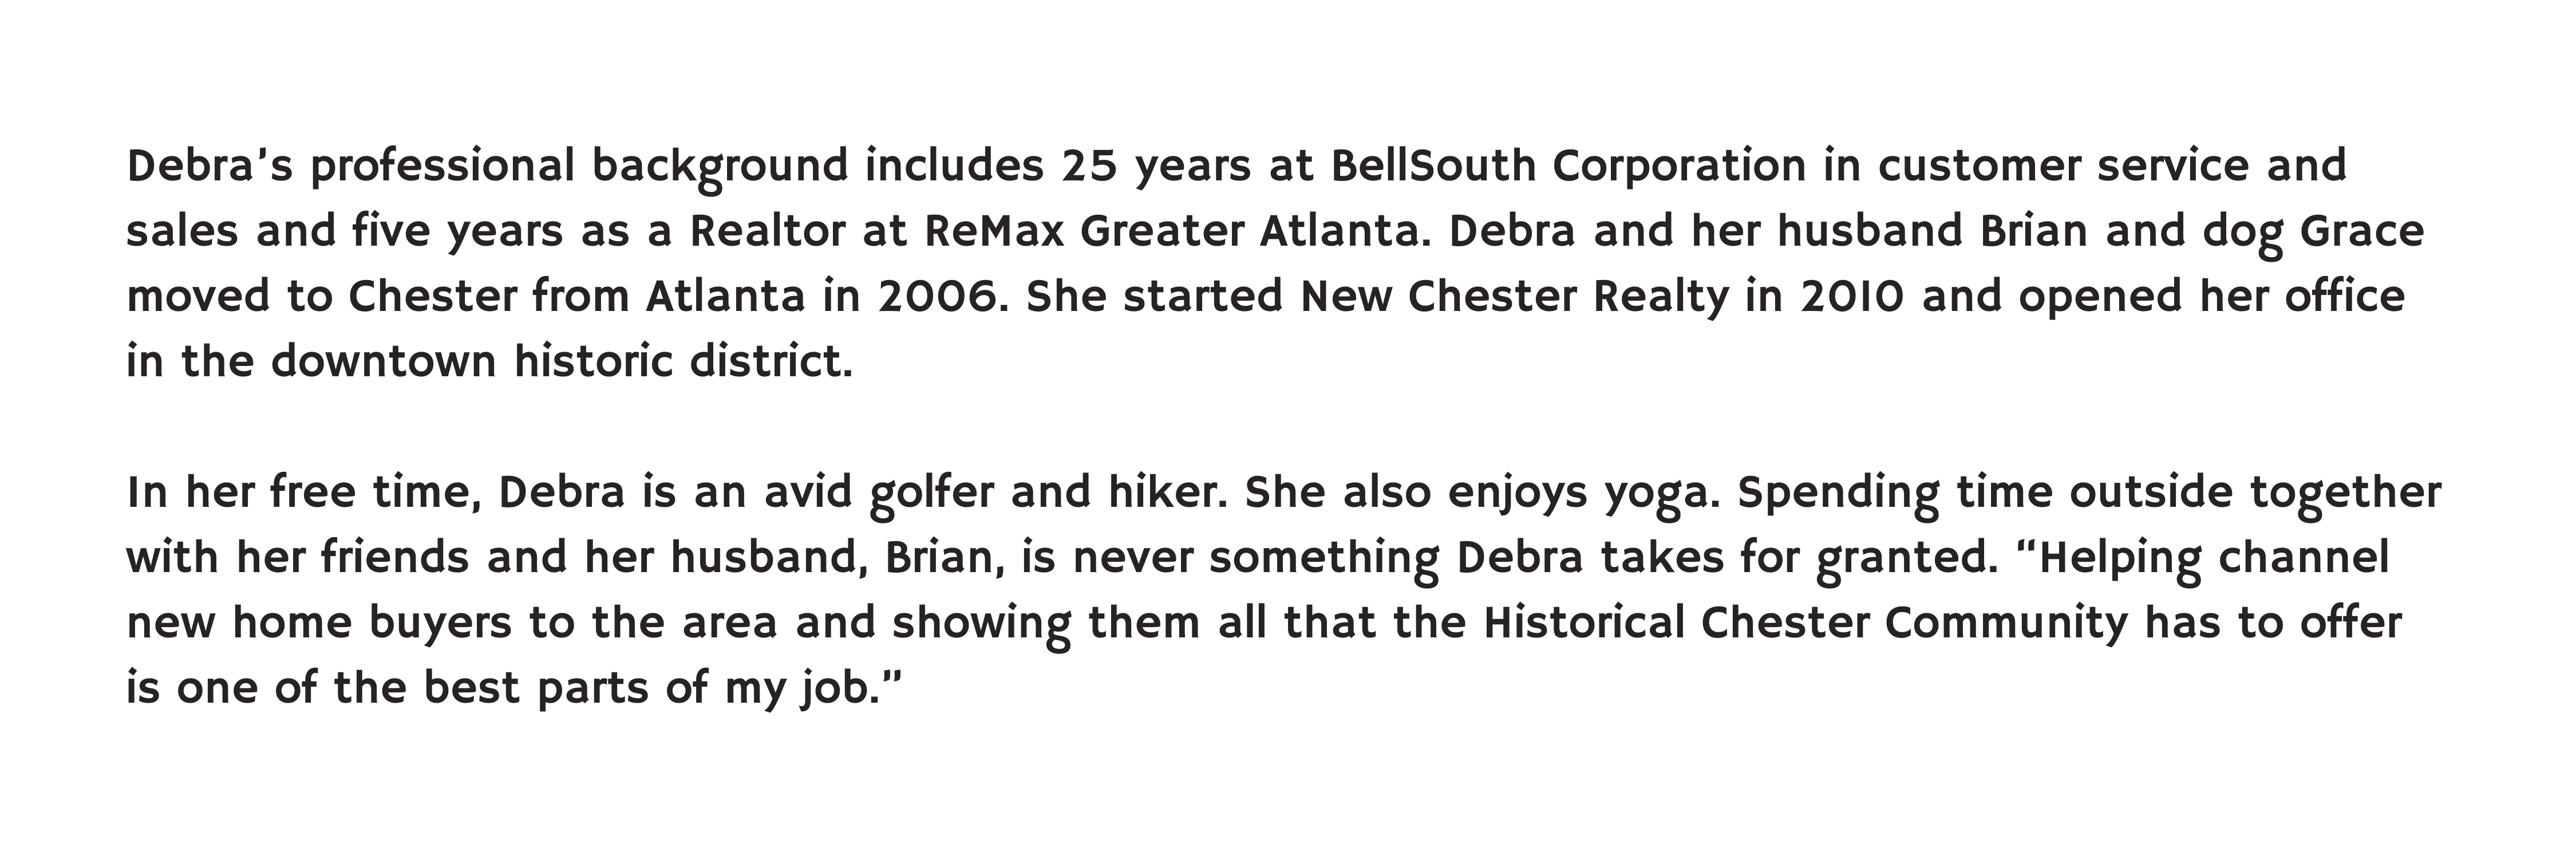 Debra’s professional background includes 25 years at BellSouth Corporation in customer service and sales and five years as a Realtor at ReMax Greater Atlanta. Debra and her husband Brian and dog Grace moved to Chester from Atlanta in 2006. She started New Chester Realty in 2010 and opened her office in the downtown historic district. In her free time, Debra is an avid golfer and hiker. She also enjoys yoga. Spending time outside together with her friends and her husband, Brian, is never something Debra takes for granted. “Helping channel new home buyers to the area and showing them all that the Historical Chester Community has to offer is one of the best parts of my job.”